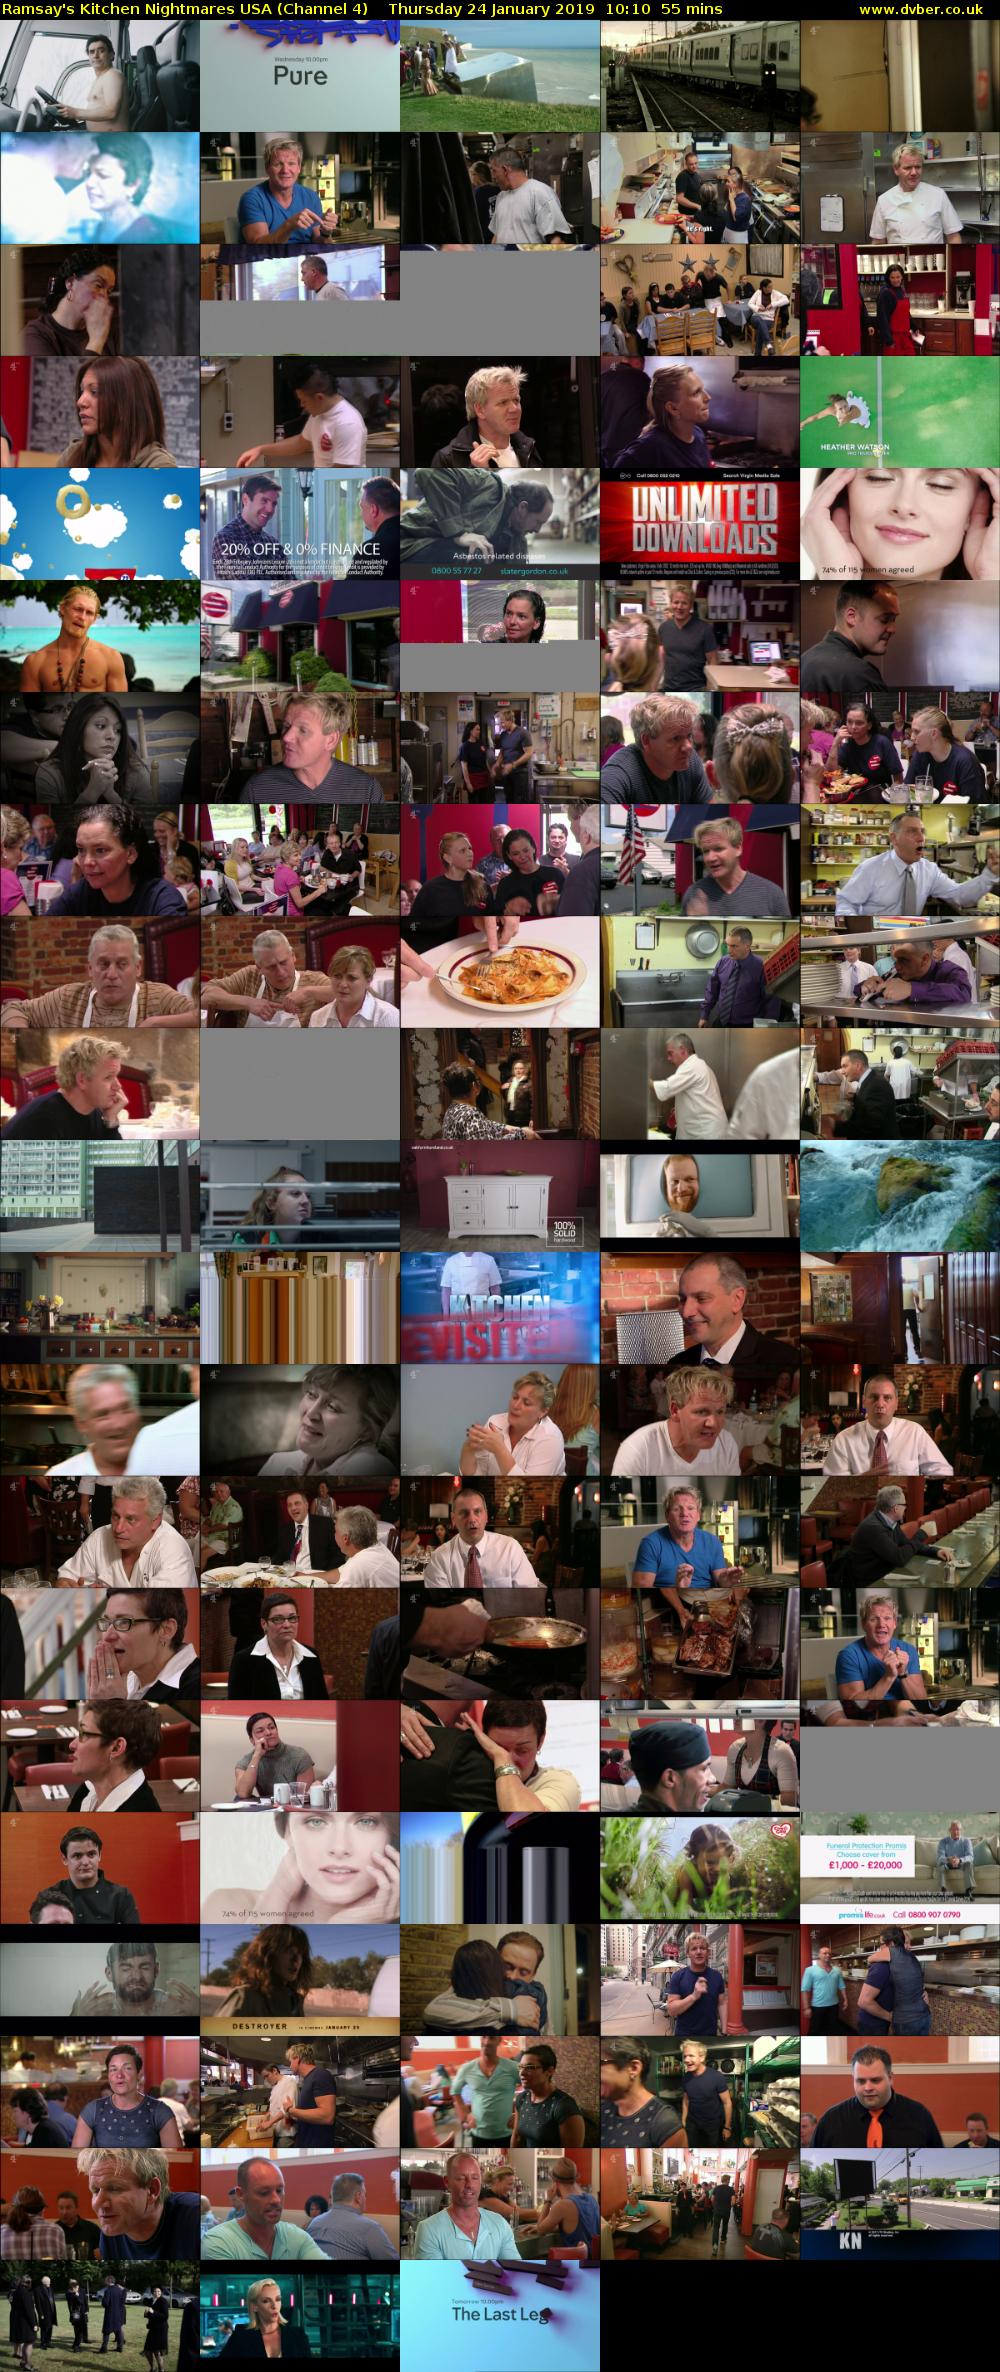 Ramsay's Kitchen Nightmares USA (Channel 4) Thursday 24 January 2019 10:10 - 11:05